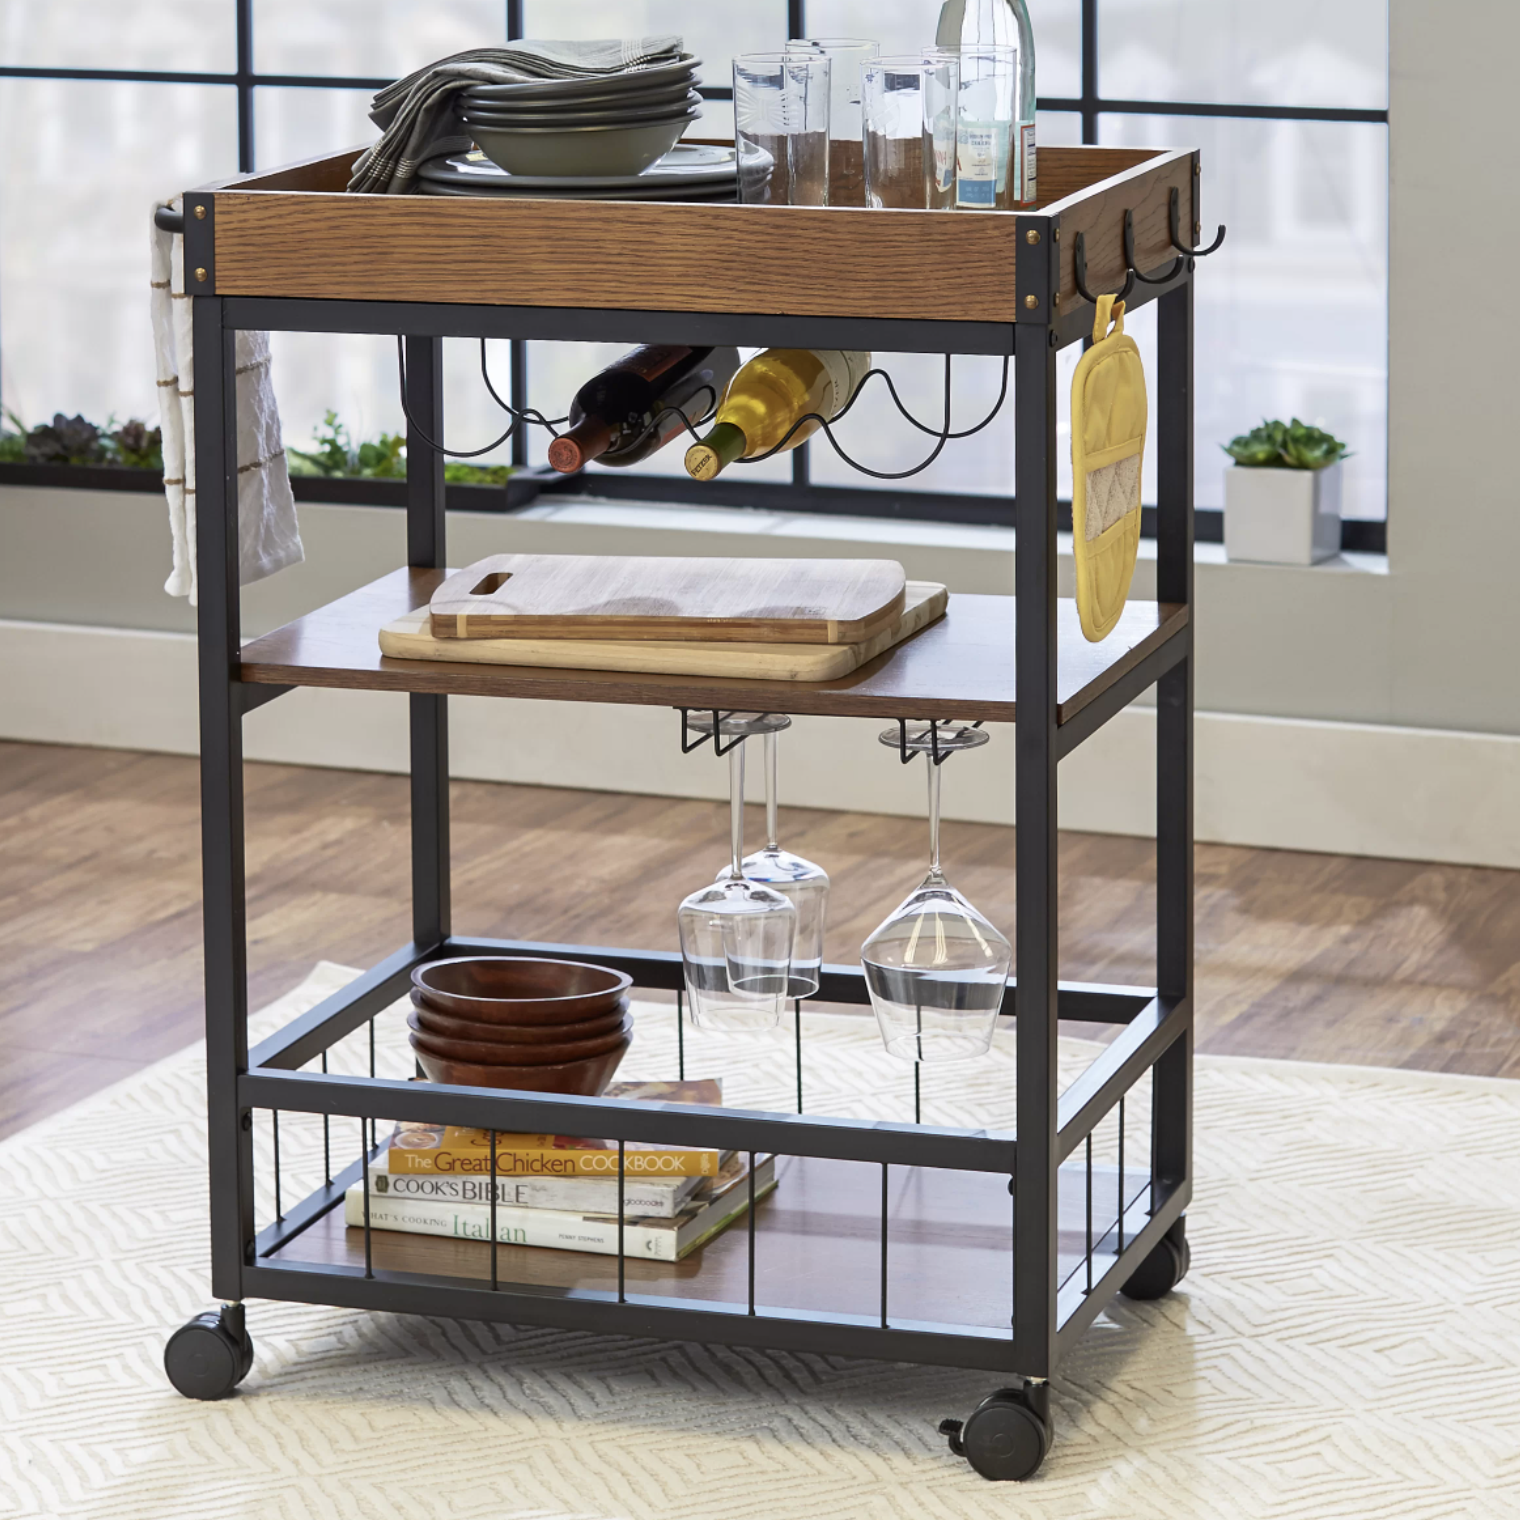 The bar cart with glasses, wine, cutting boards, and cookbooks on it